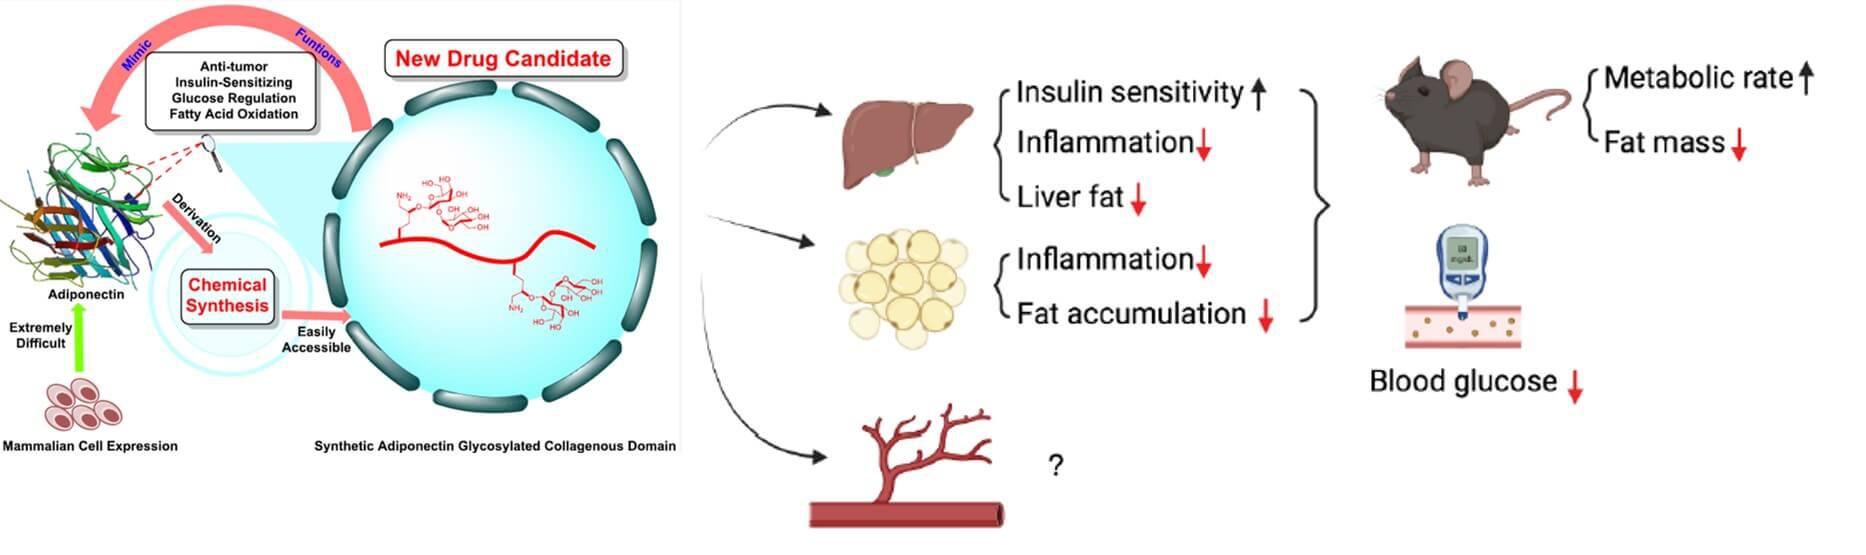 Adiponectin downsized mimics synthesis and their potential applications in metabolic diseases 